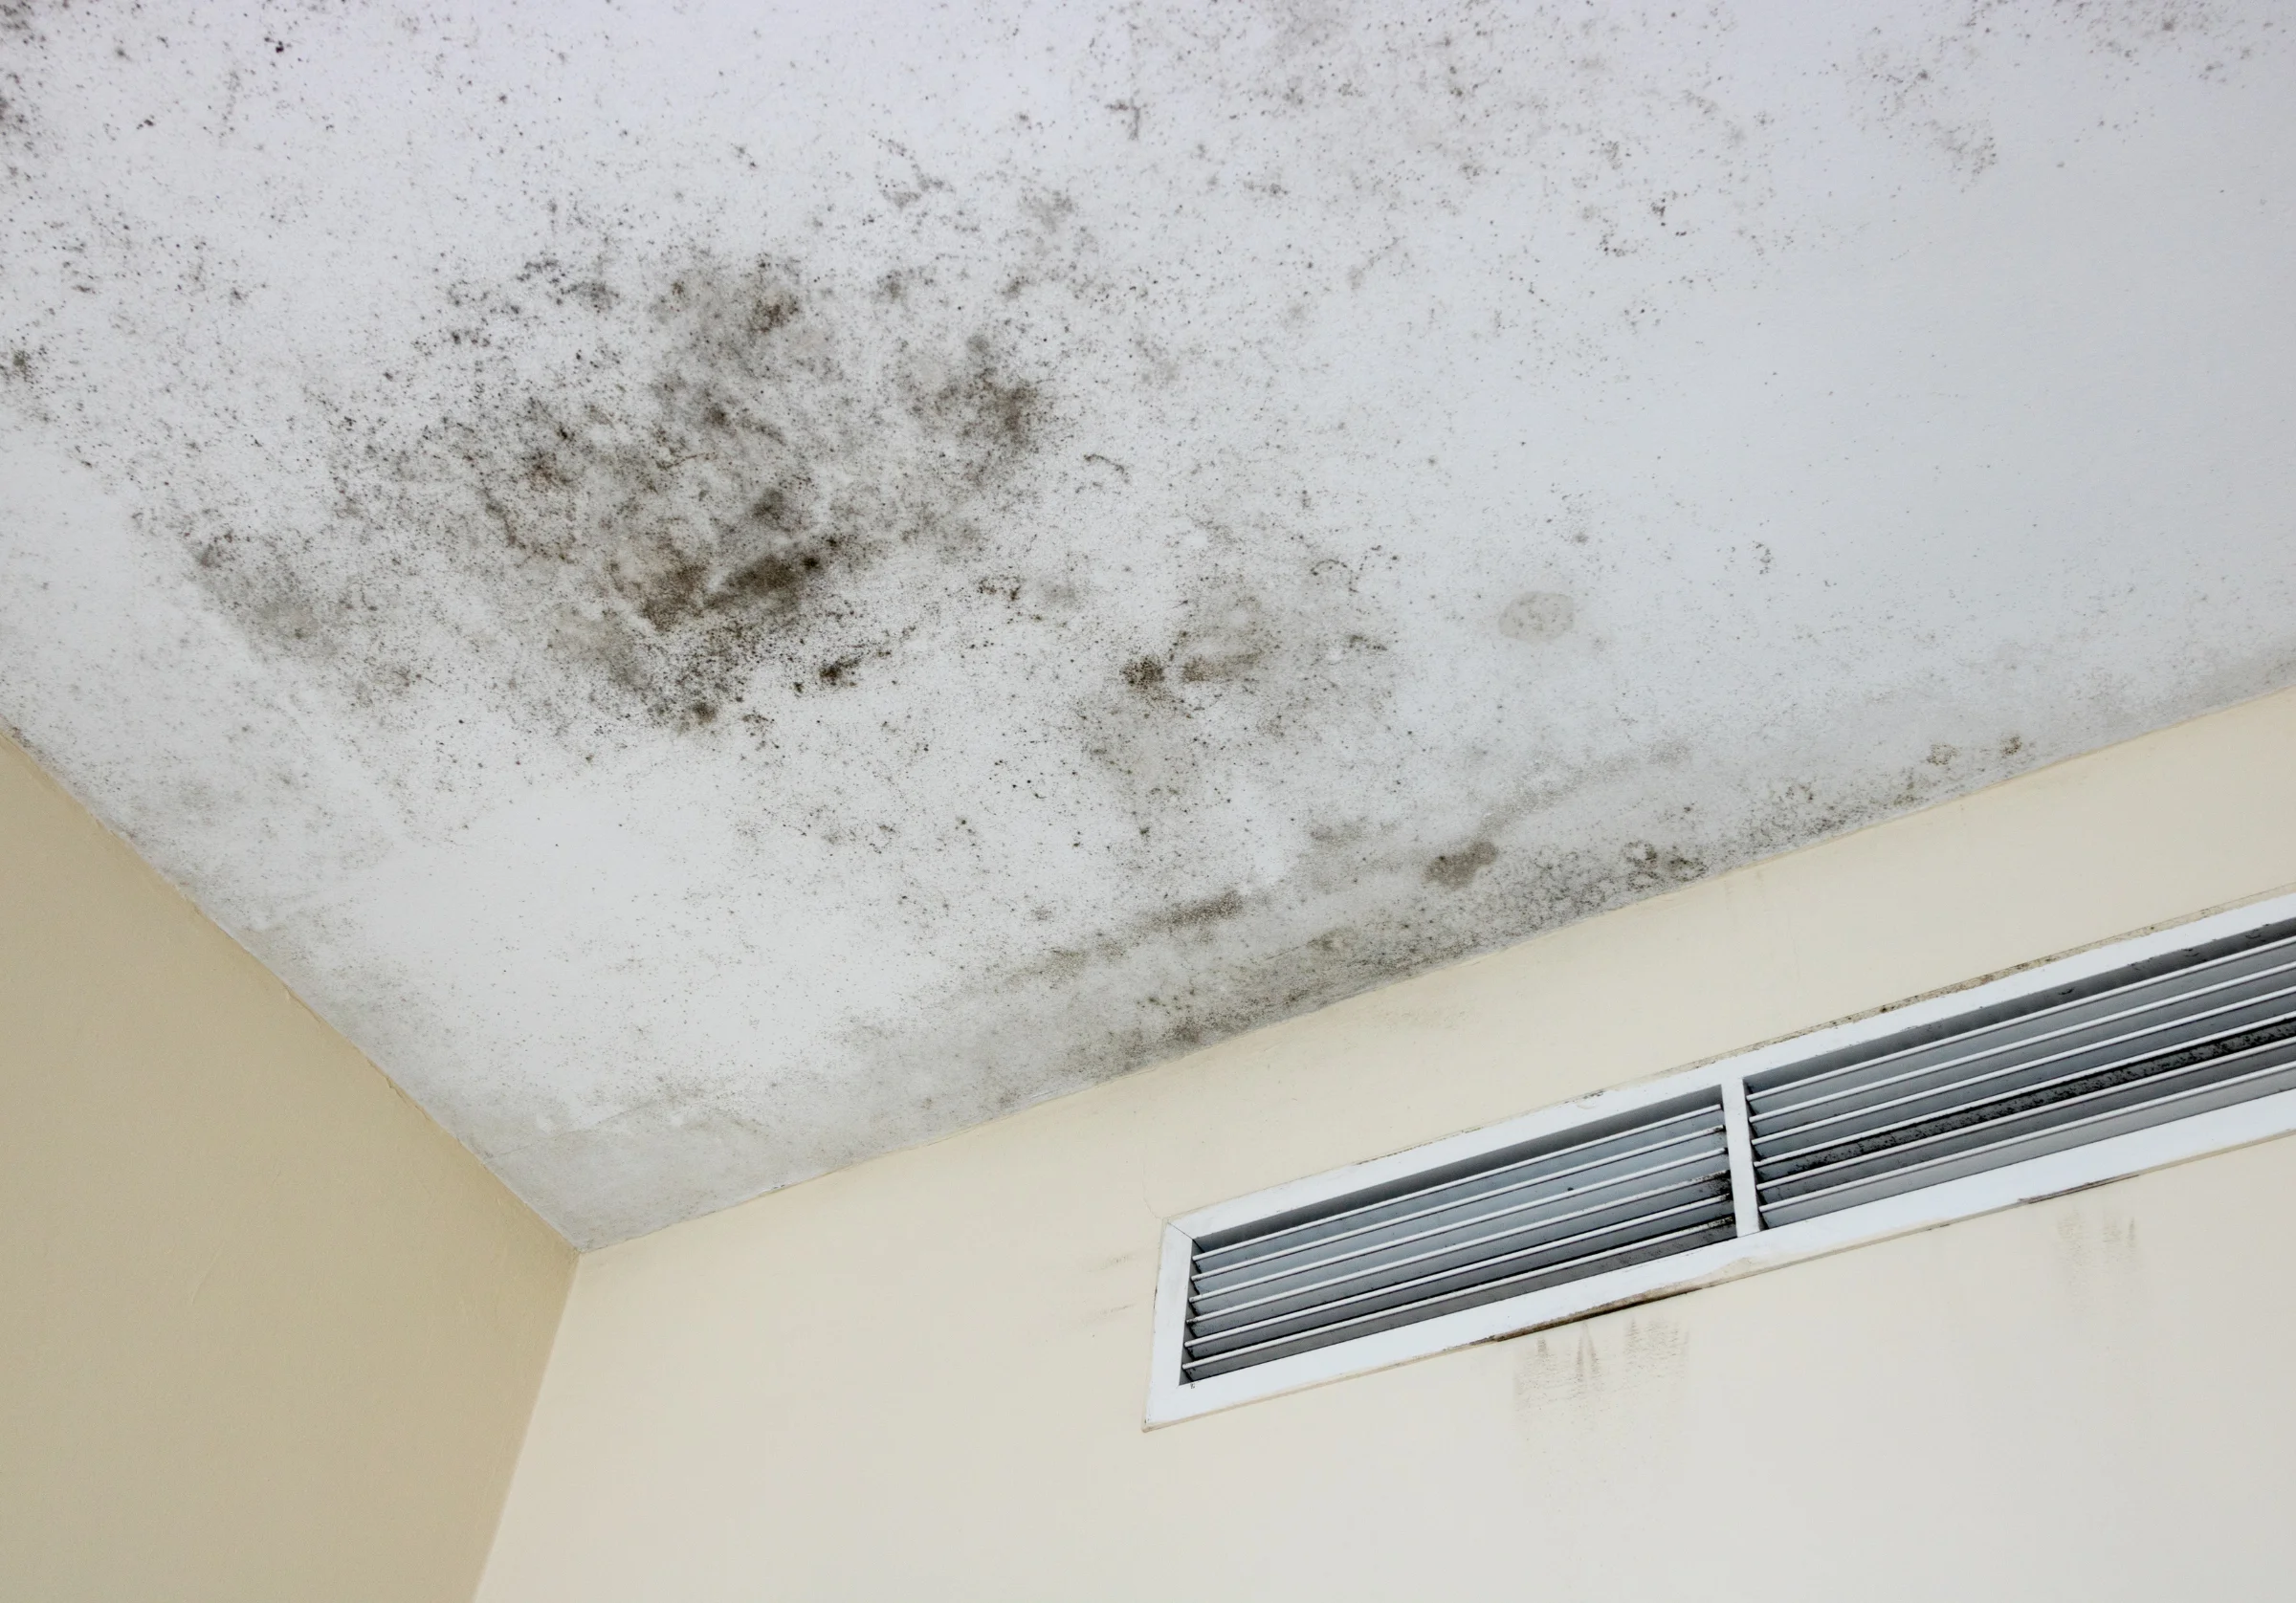 Mold Remediation commercial property managers commercial property managers